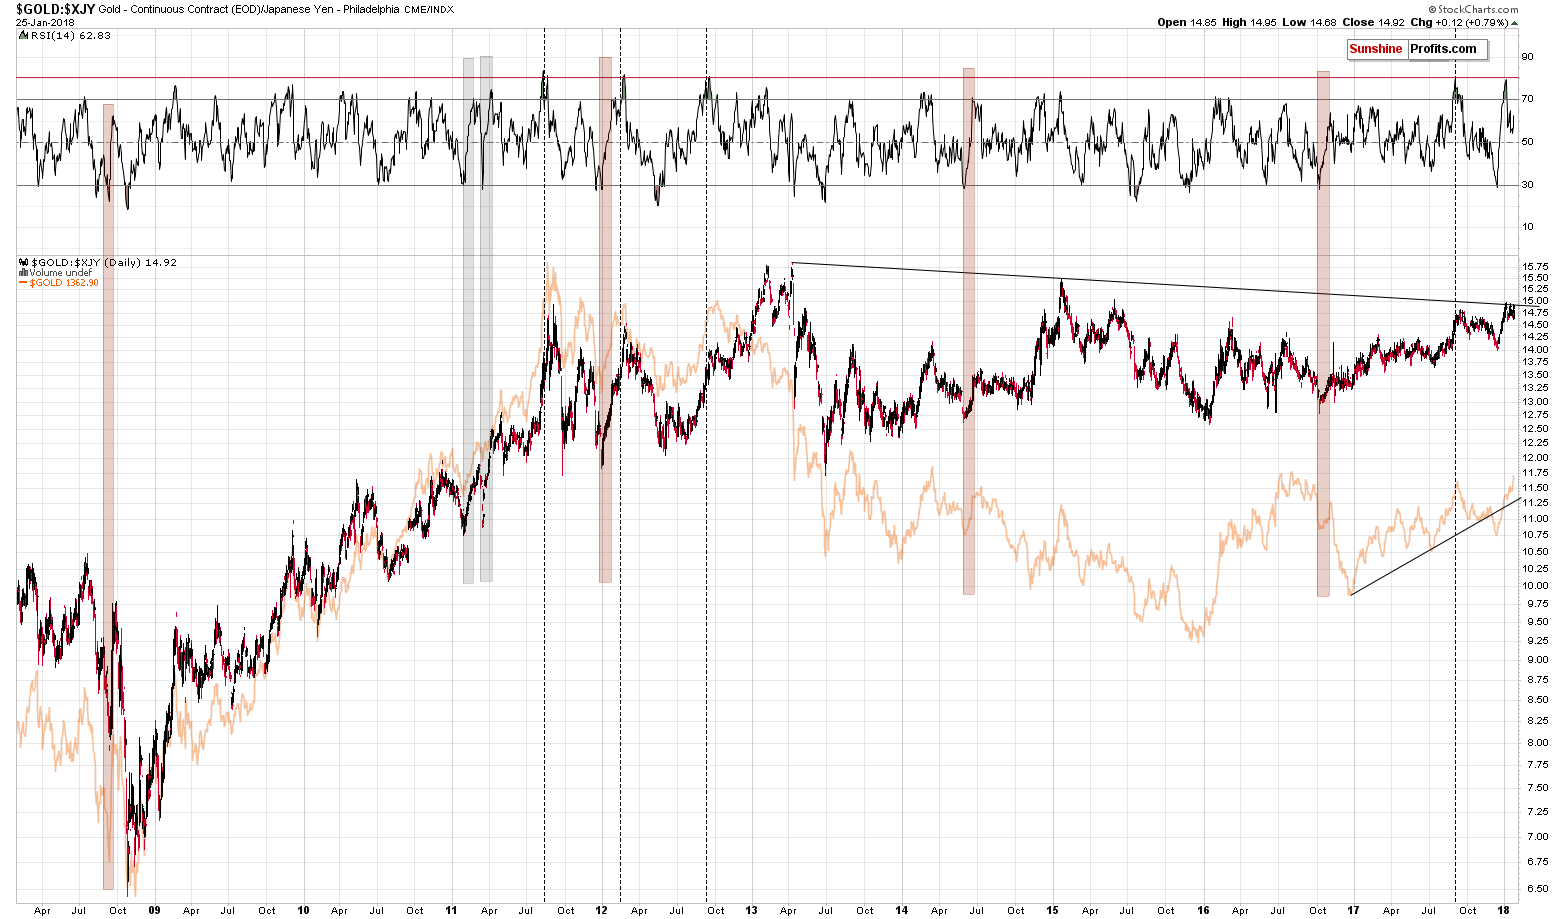 GOLD:XJY - Gold priced in Japanese yen